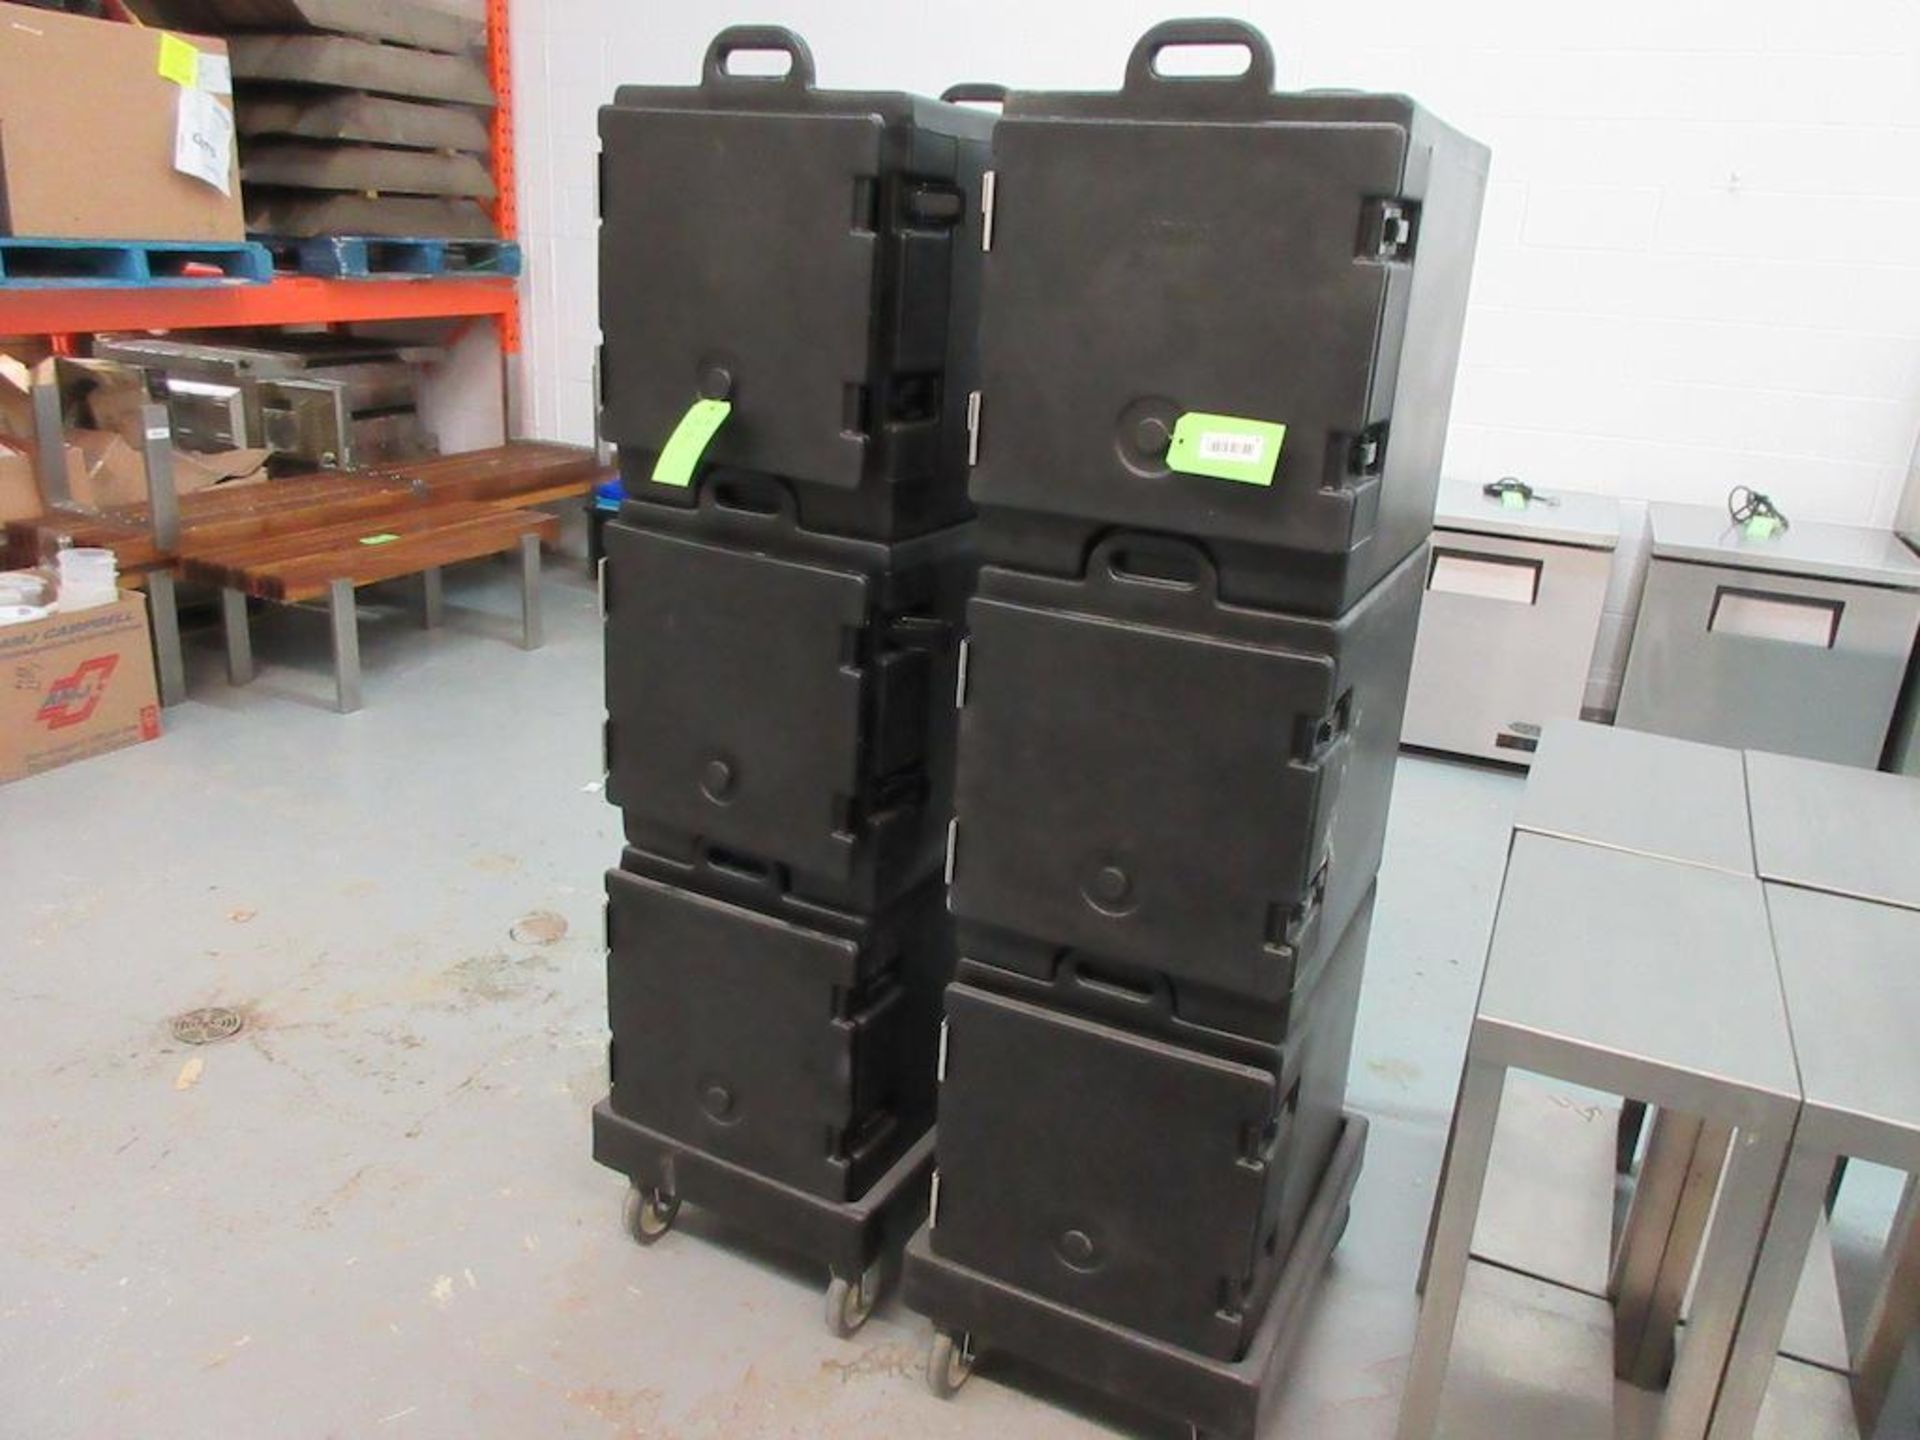 Lot 6 Cambro insulated transporters, 17"w x 24"d x 20"h, adjustable shelves, plus 2 rolling bases - Image 2 of 6